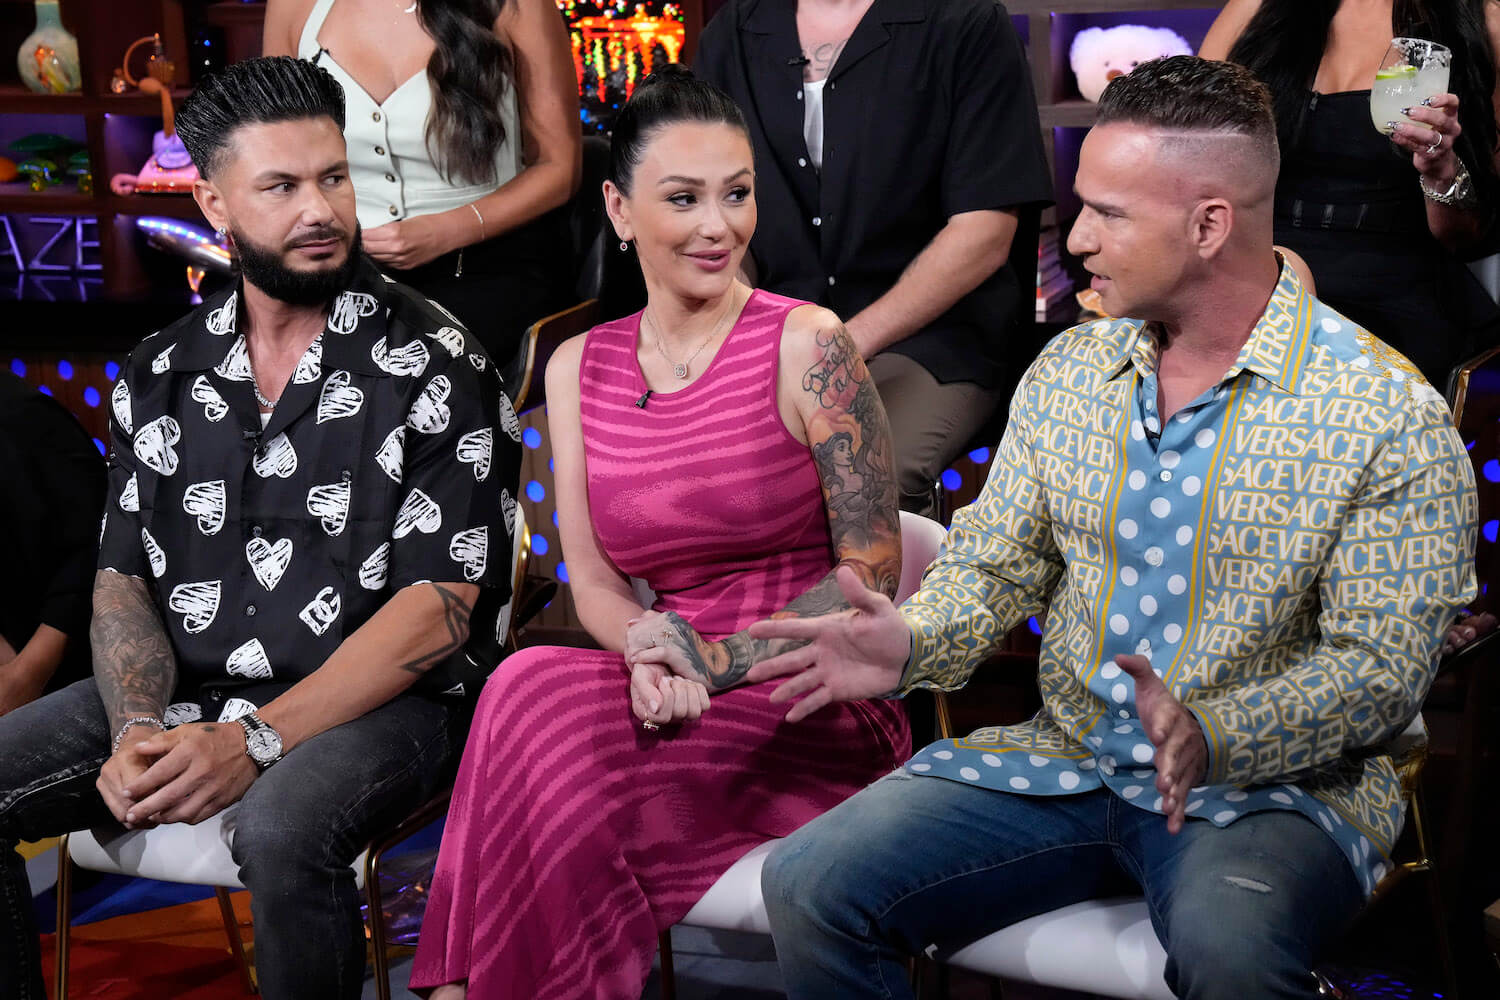 'Jersey Shore: Family Vacation' Season 7 stars 'DJ Pauly D' Delvecchio, Jenni 'JWOWW' Farley, and Mike 'The Situation' Sorrentino sitting next to each other